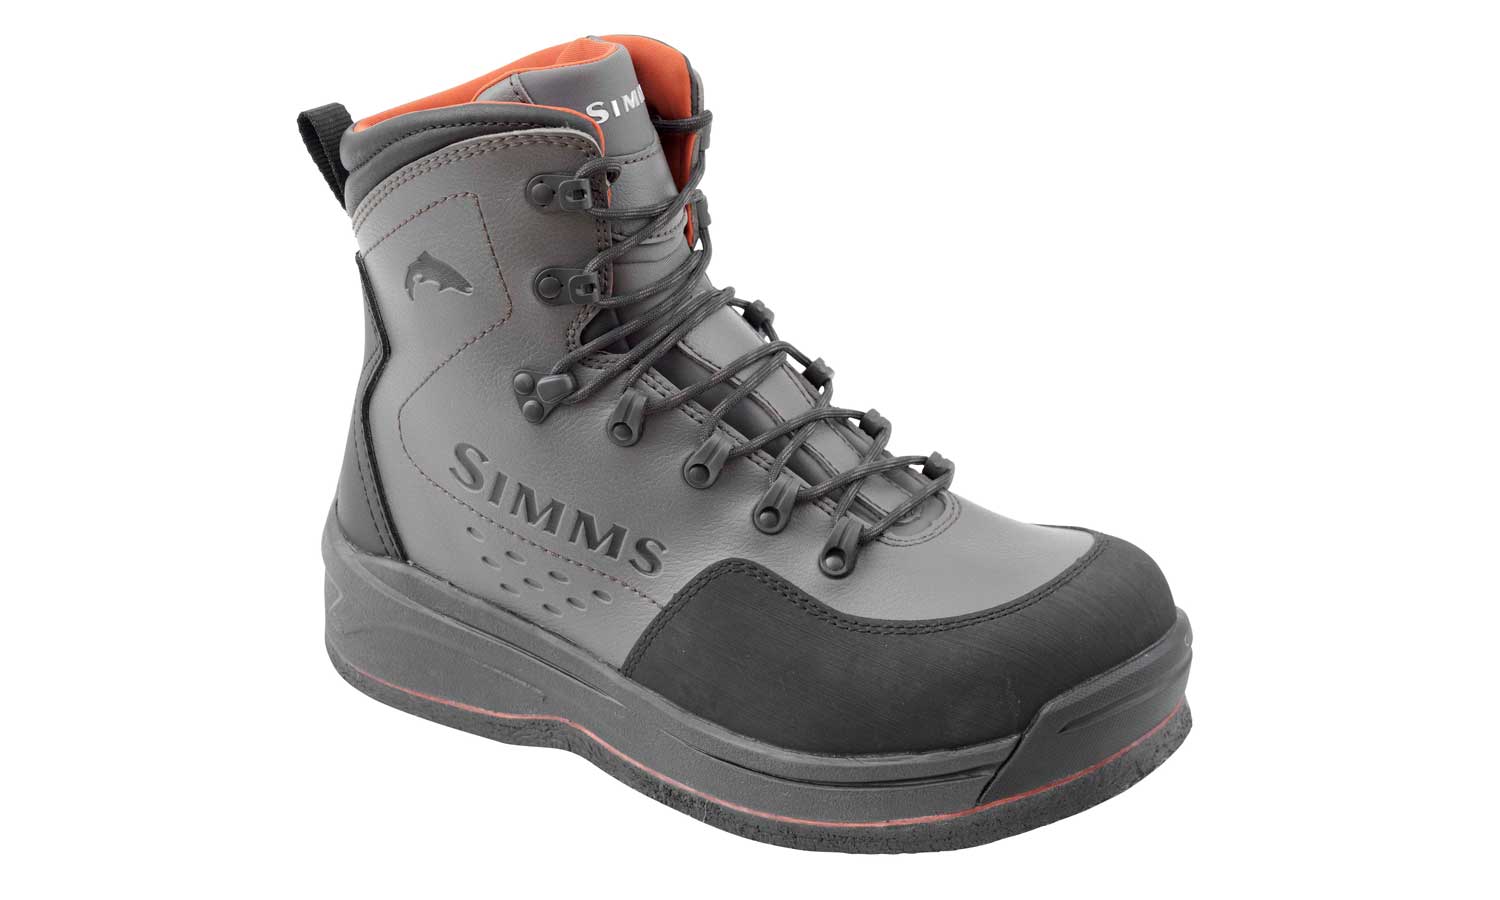 SIMMS Fly Fishing Wading Boots w/ Rubber Sole Men's US 11